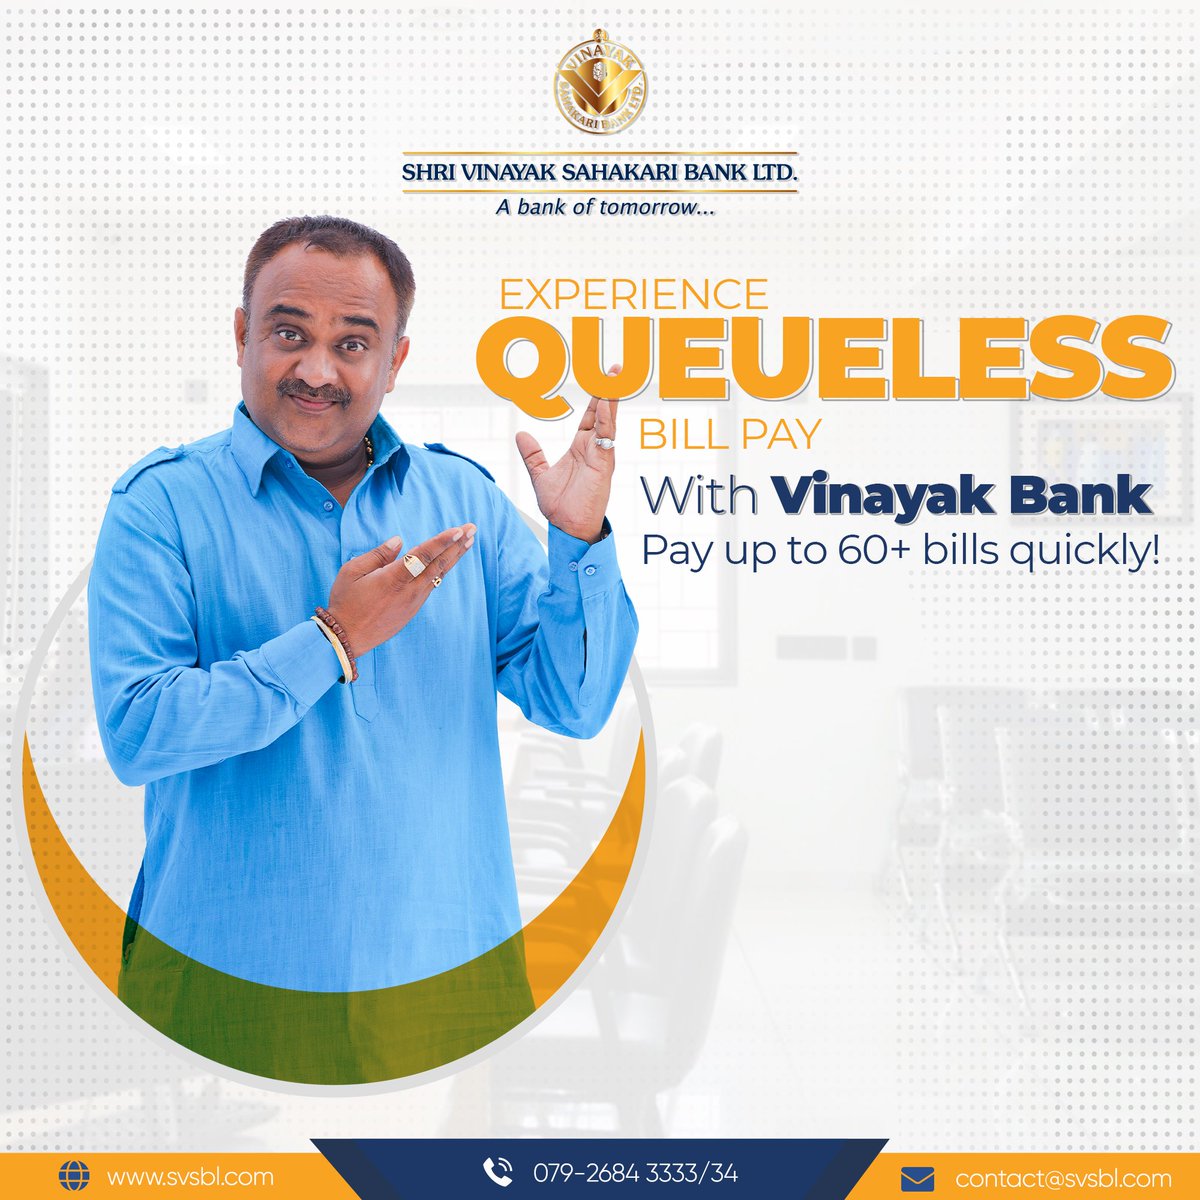 Instant, seamless and convenient! 

For assistance, feel free to call us at 079-2684 3333/34 
.
.
.
.
#shrivinayakbank #bank #bankingservices #queuelessbanking  #billpayment #visitnow #quickpayment #quickservice #billpaymentservices #bankoftomorrow #banking #payyourbill